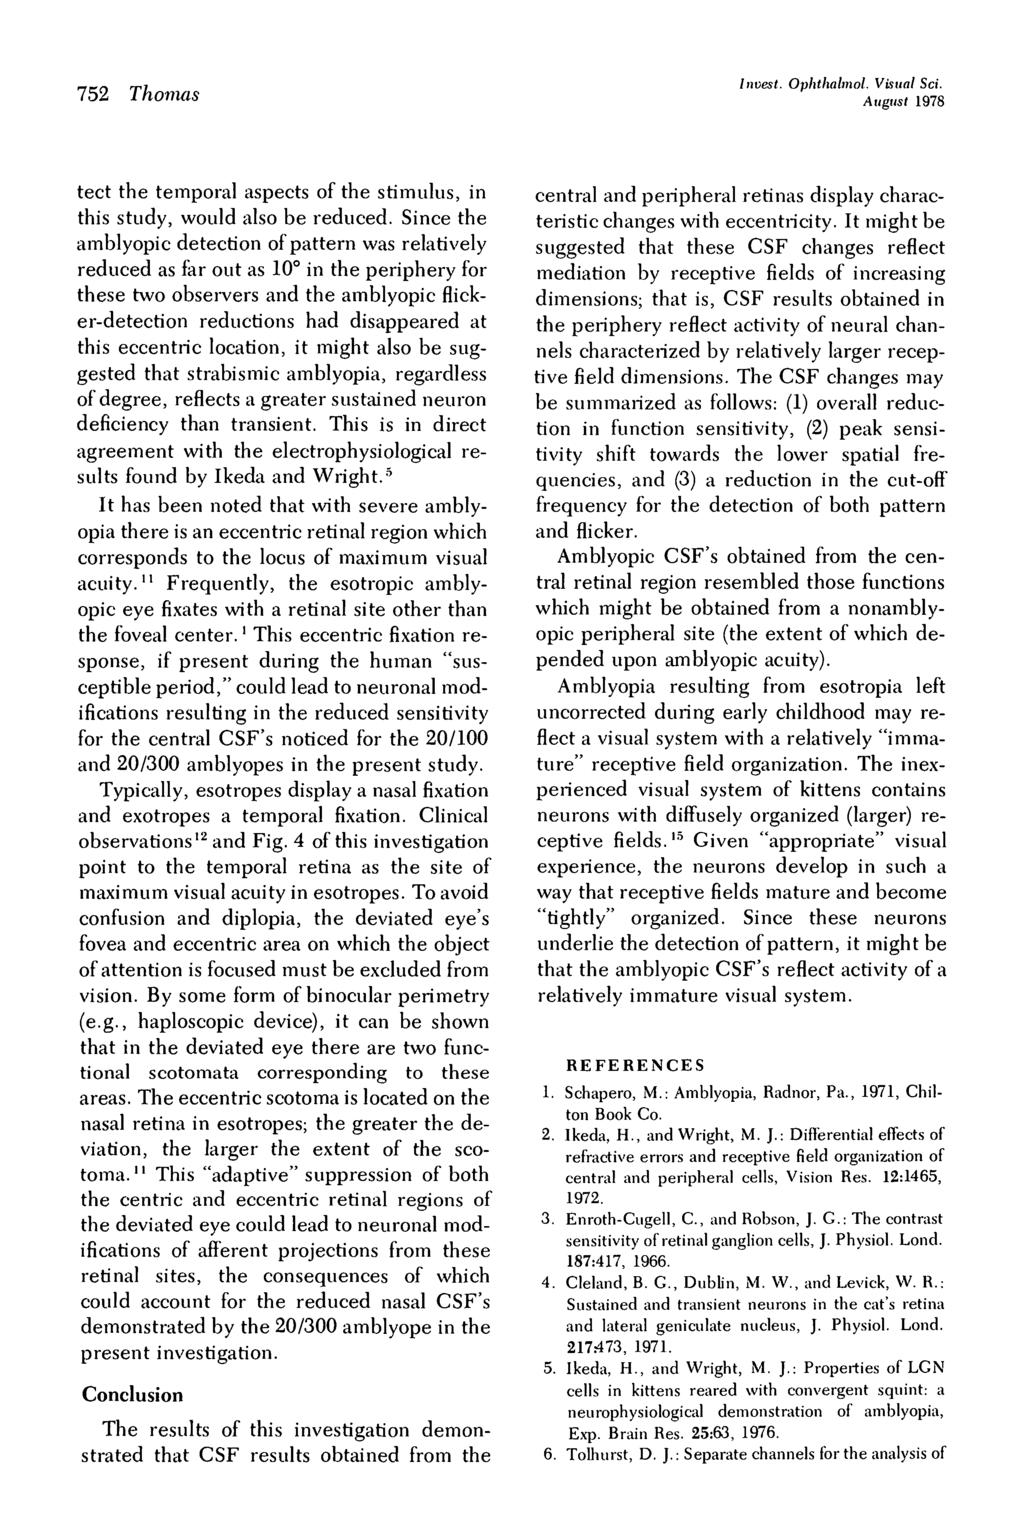 752 Thomas Invest. Ophthalmol. Visual Sci. August 1978 tect the temporal aspects of the stimulus, in this study, would also be reduced.